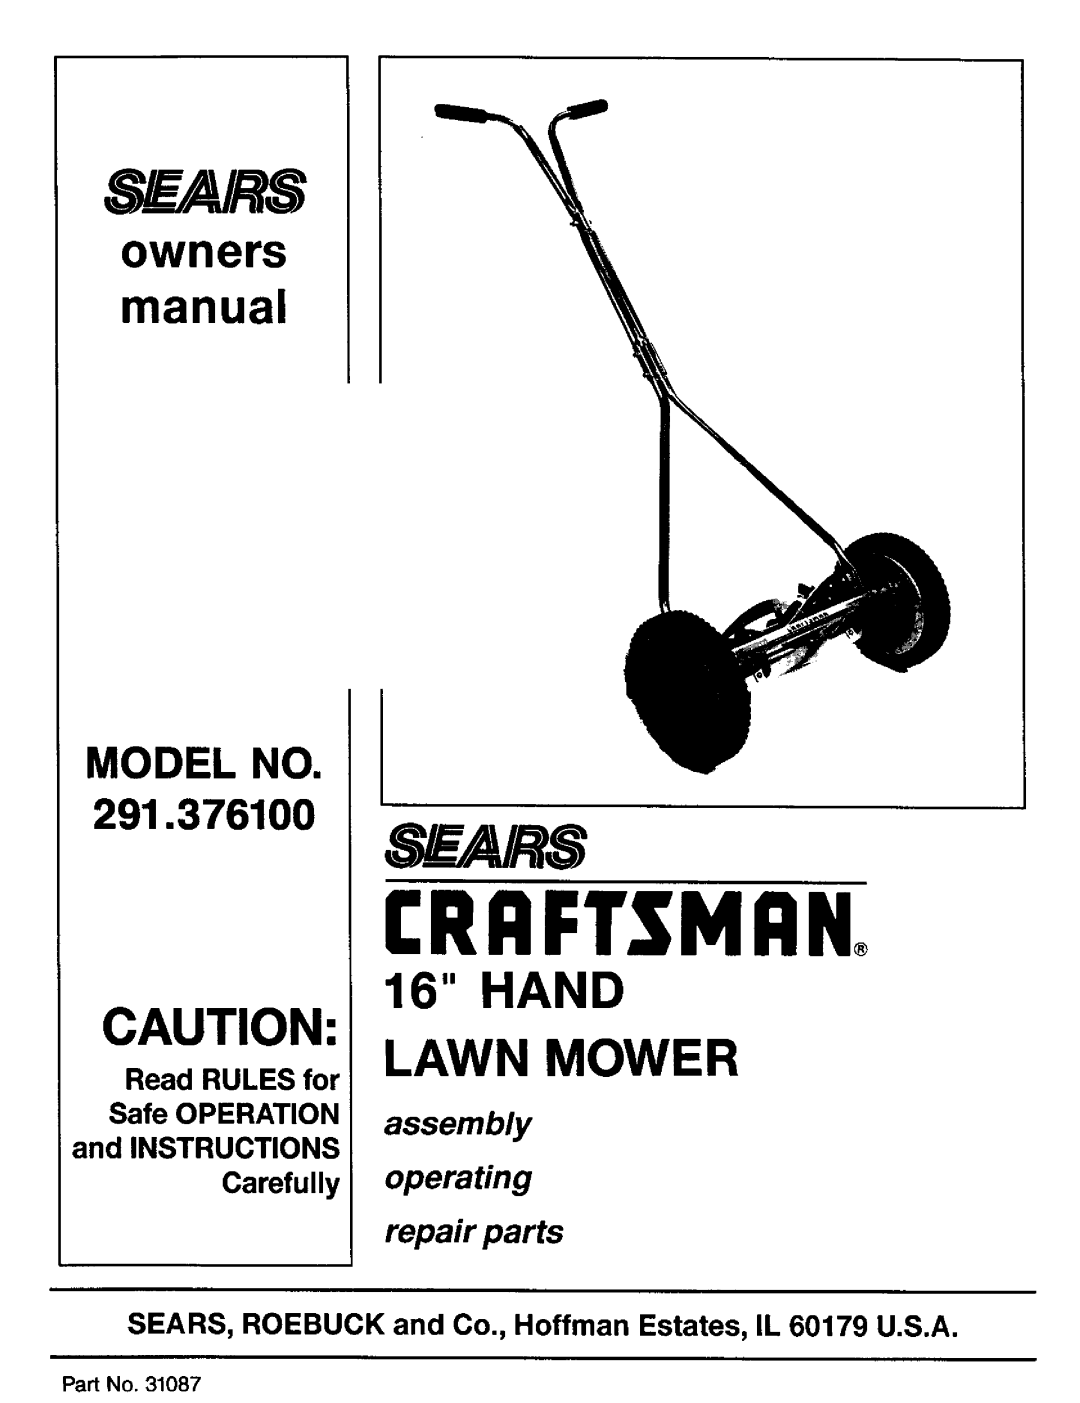 Craftsman 291.376100 owner manual I Rrftsmrn, Hand Lawn Mower, 8EA/RS, 8 A/R8, Model No, assembly, repair parts 